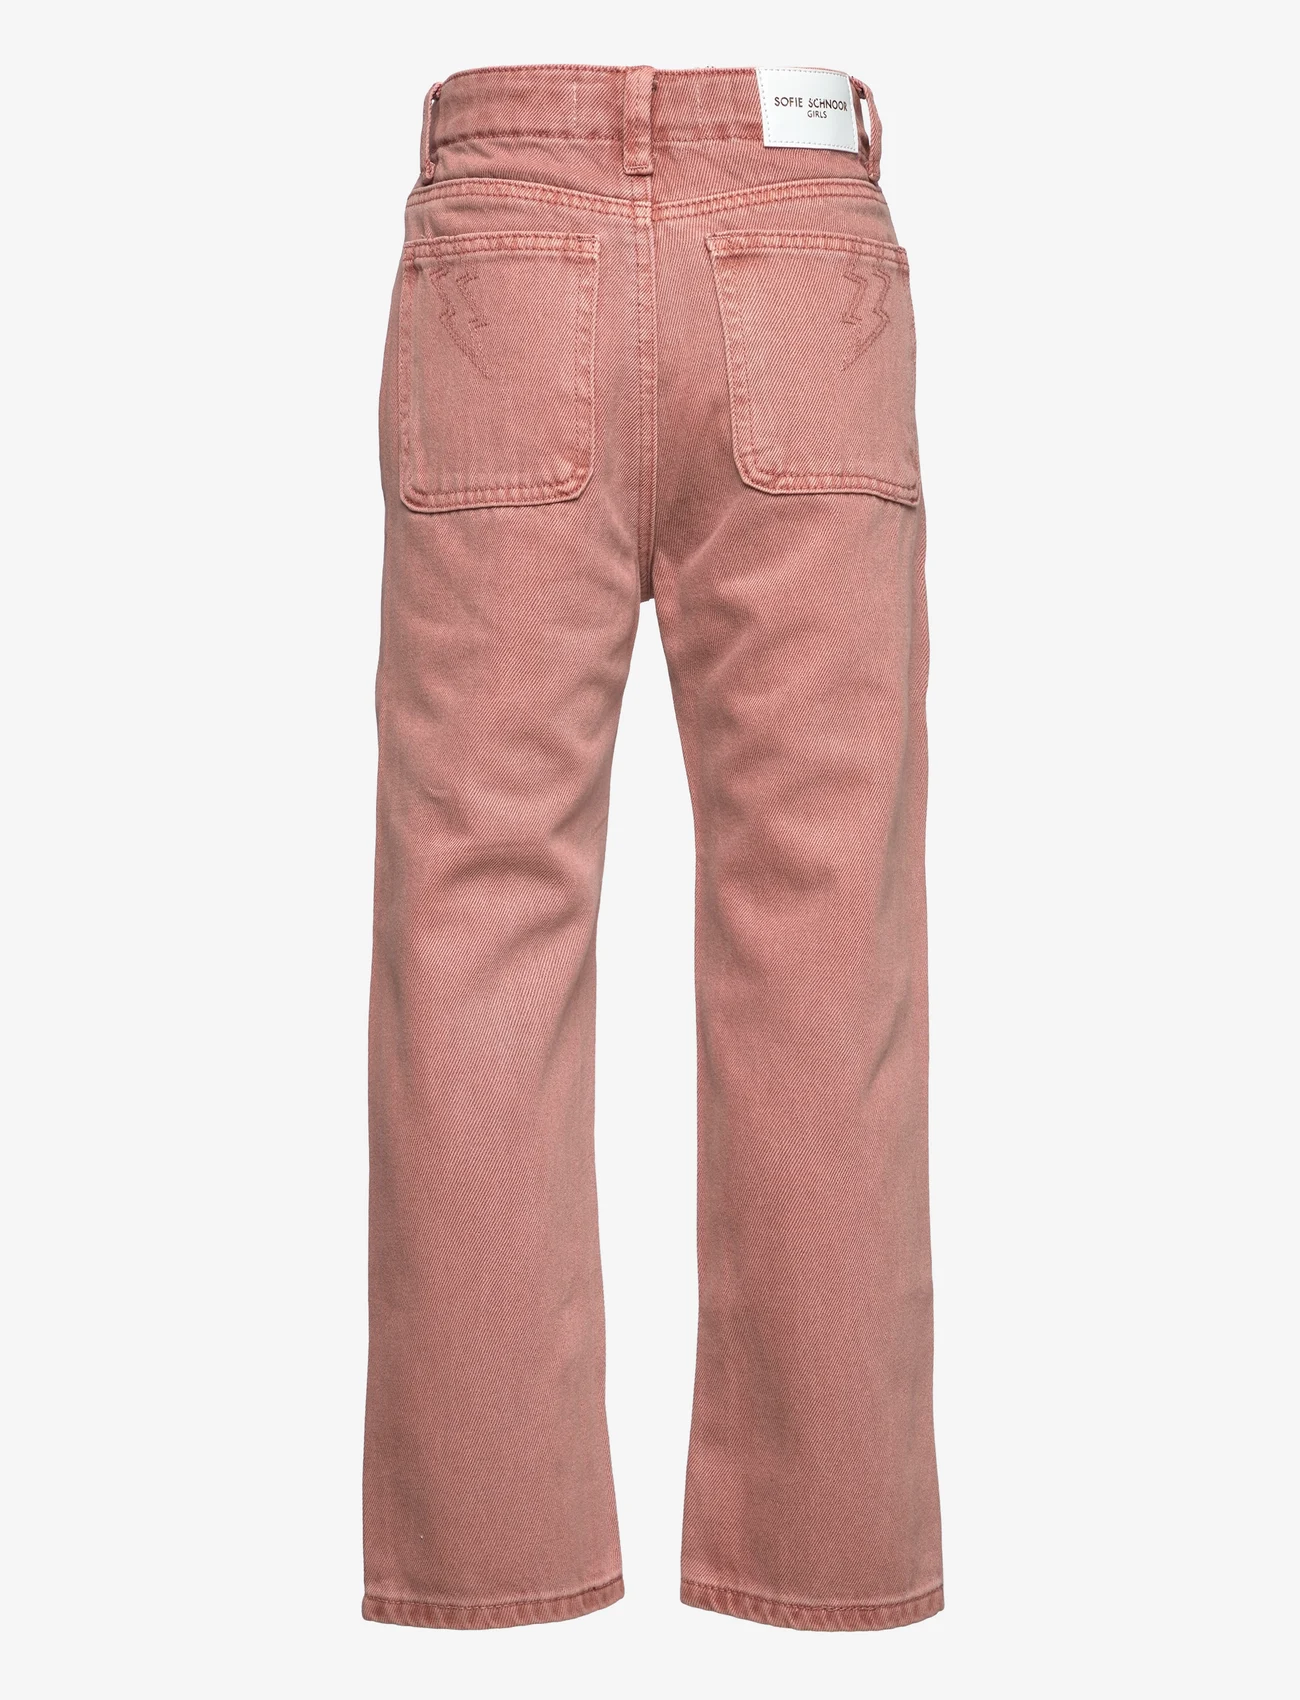 Sofie Schnoor Baby and Kids - G223214 - vide jeans - misty rose - 1